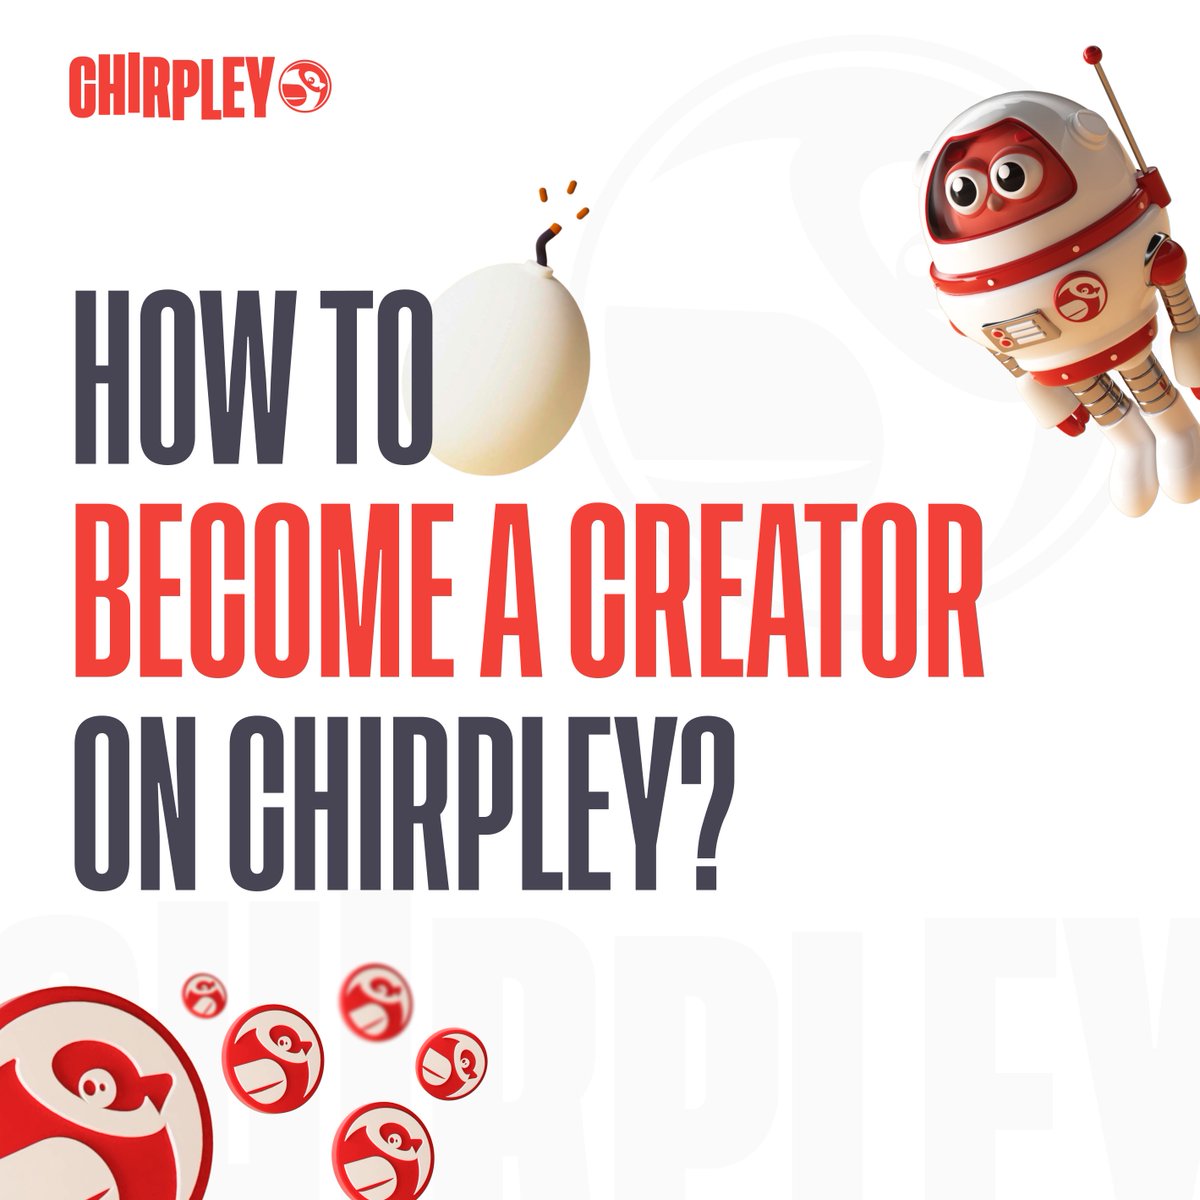 👾How to Join Chirpley as a Creator? We’re always happy to see new recruits joining Chirpley. If you’re passionate about creating engaging content in a certain niche, the first step is covered. For other requirements, check our guide for newcomers. 📍Can anyone join Chirpley?…